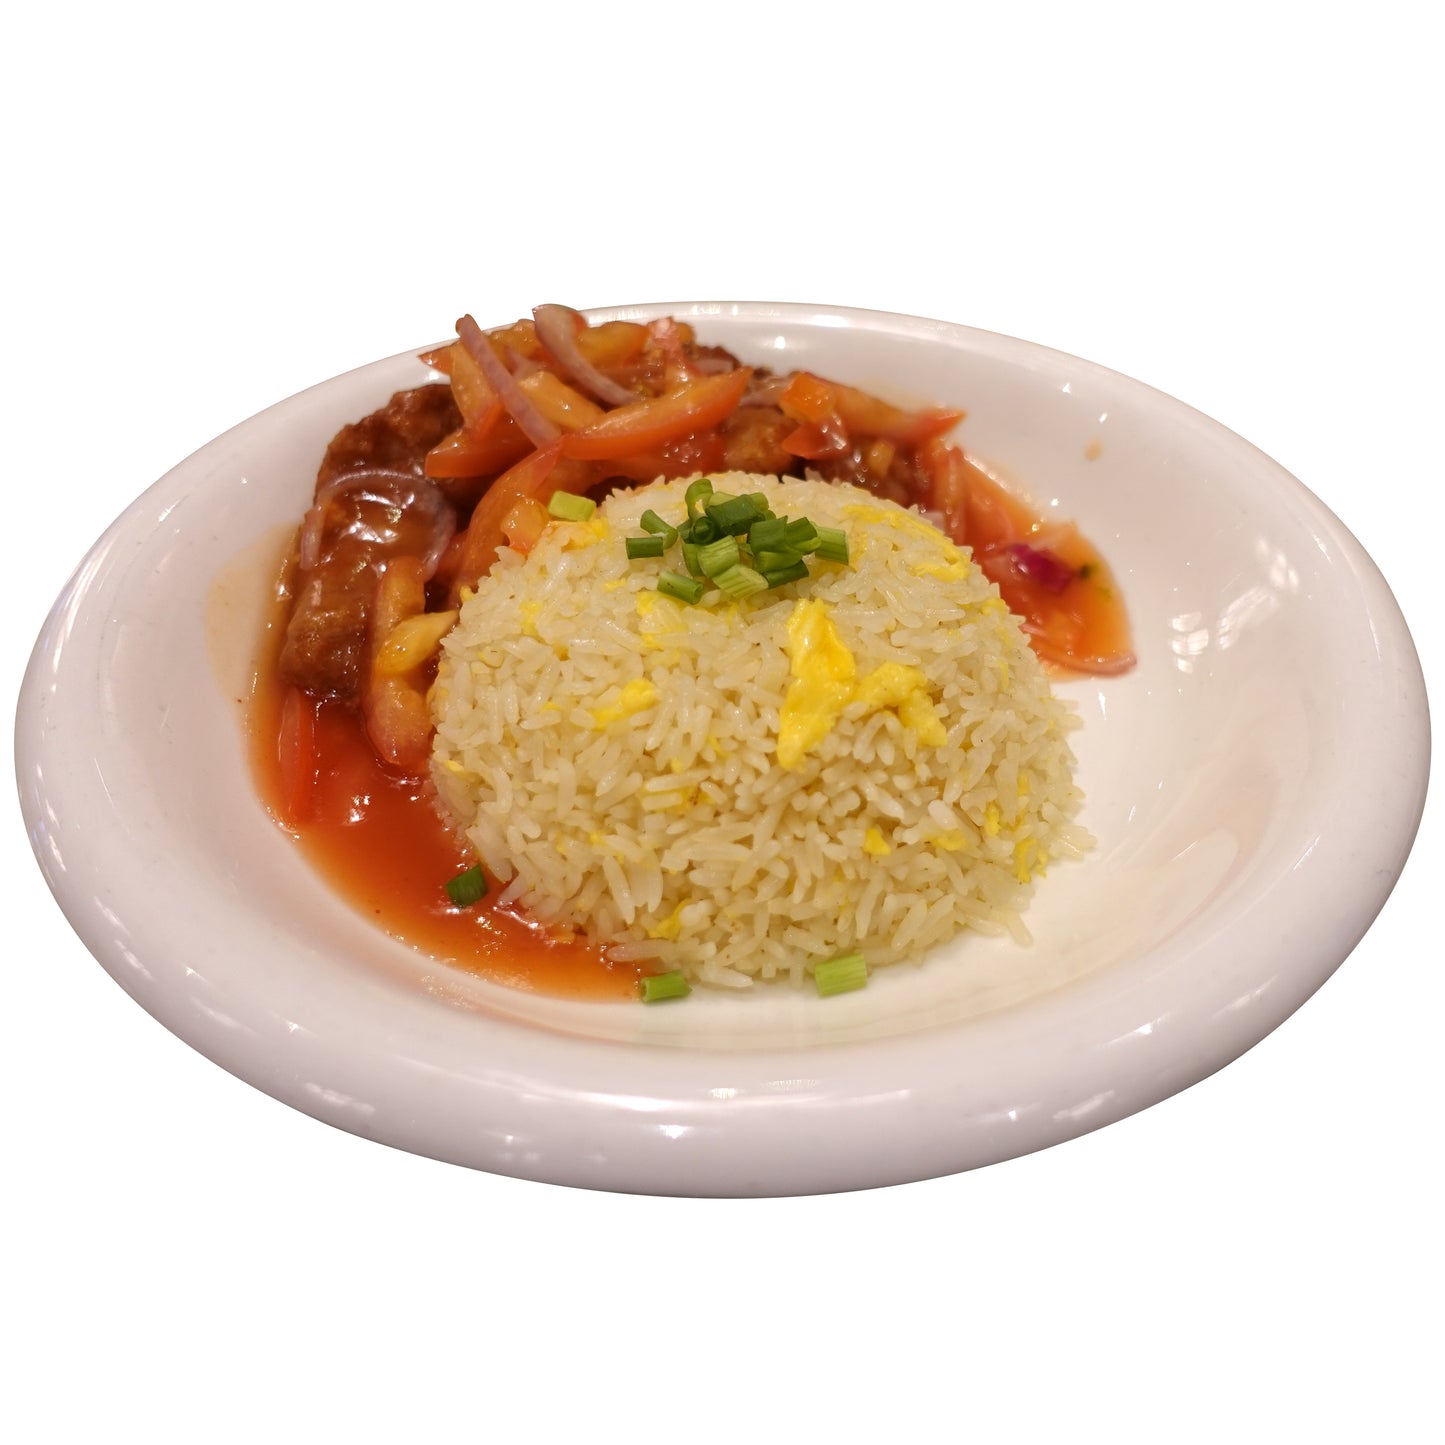 Fried Rice with Pork Chop in Tomato Sauce 茄汁猪扒饭